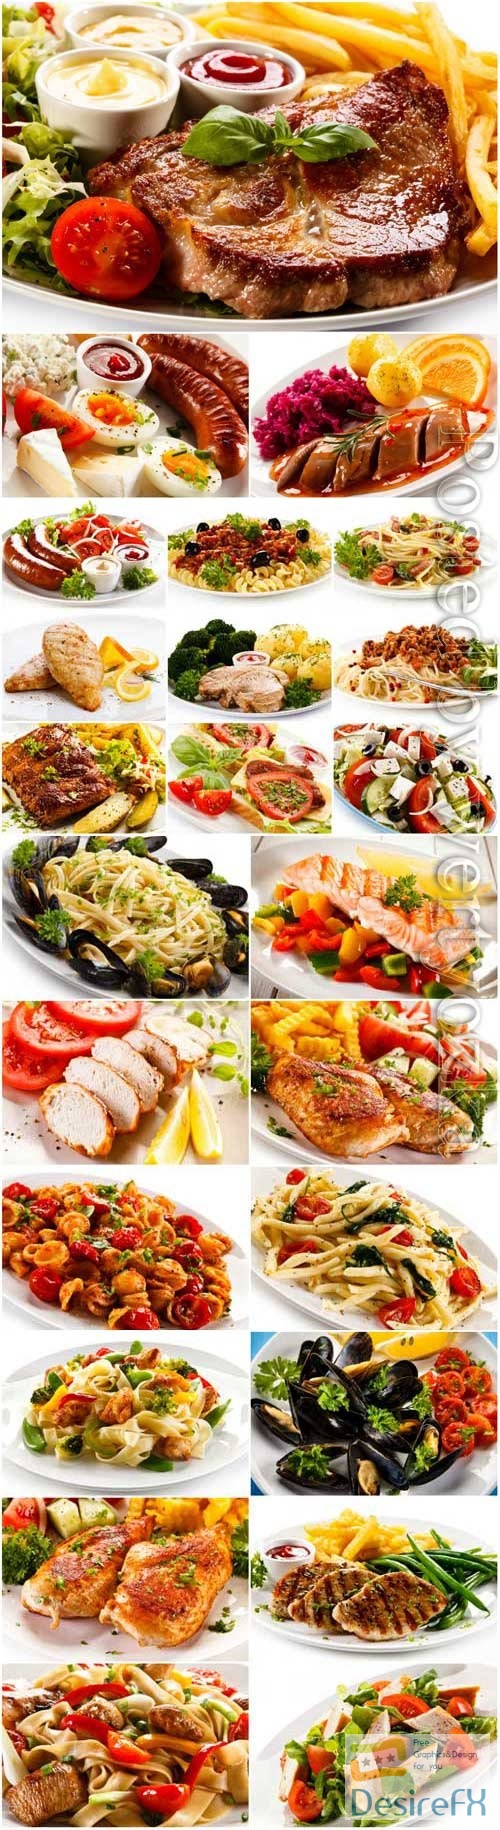 Delicious food, meat and vegetables stock photo